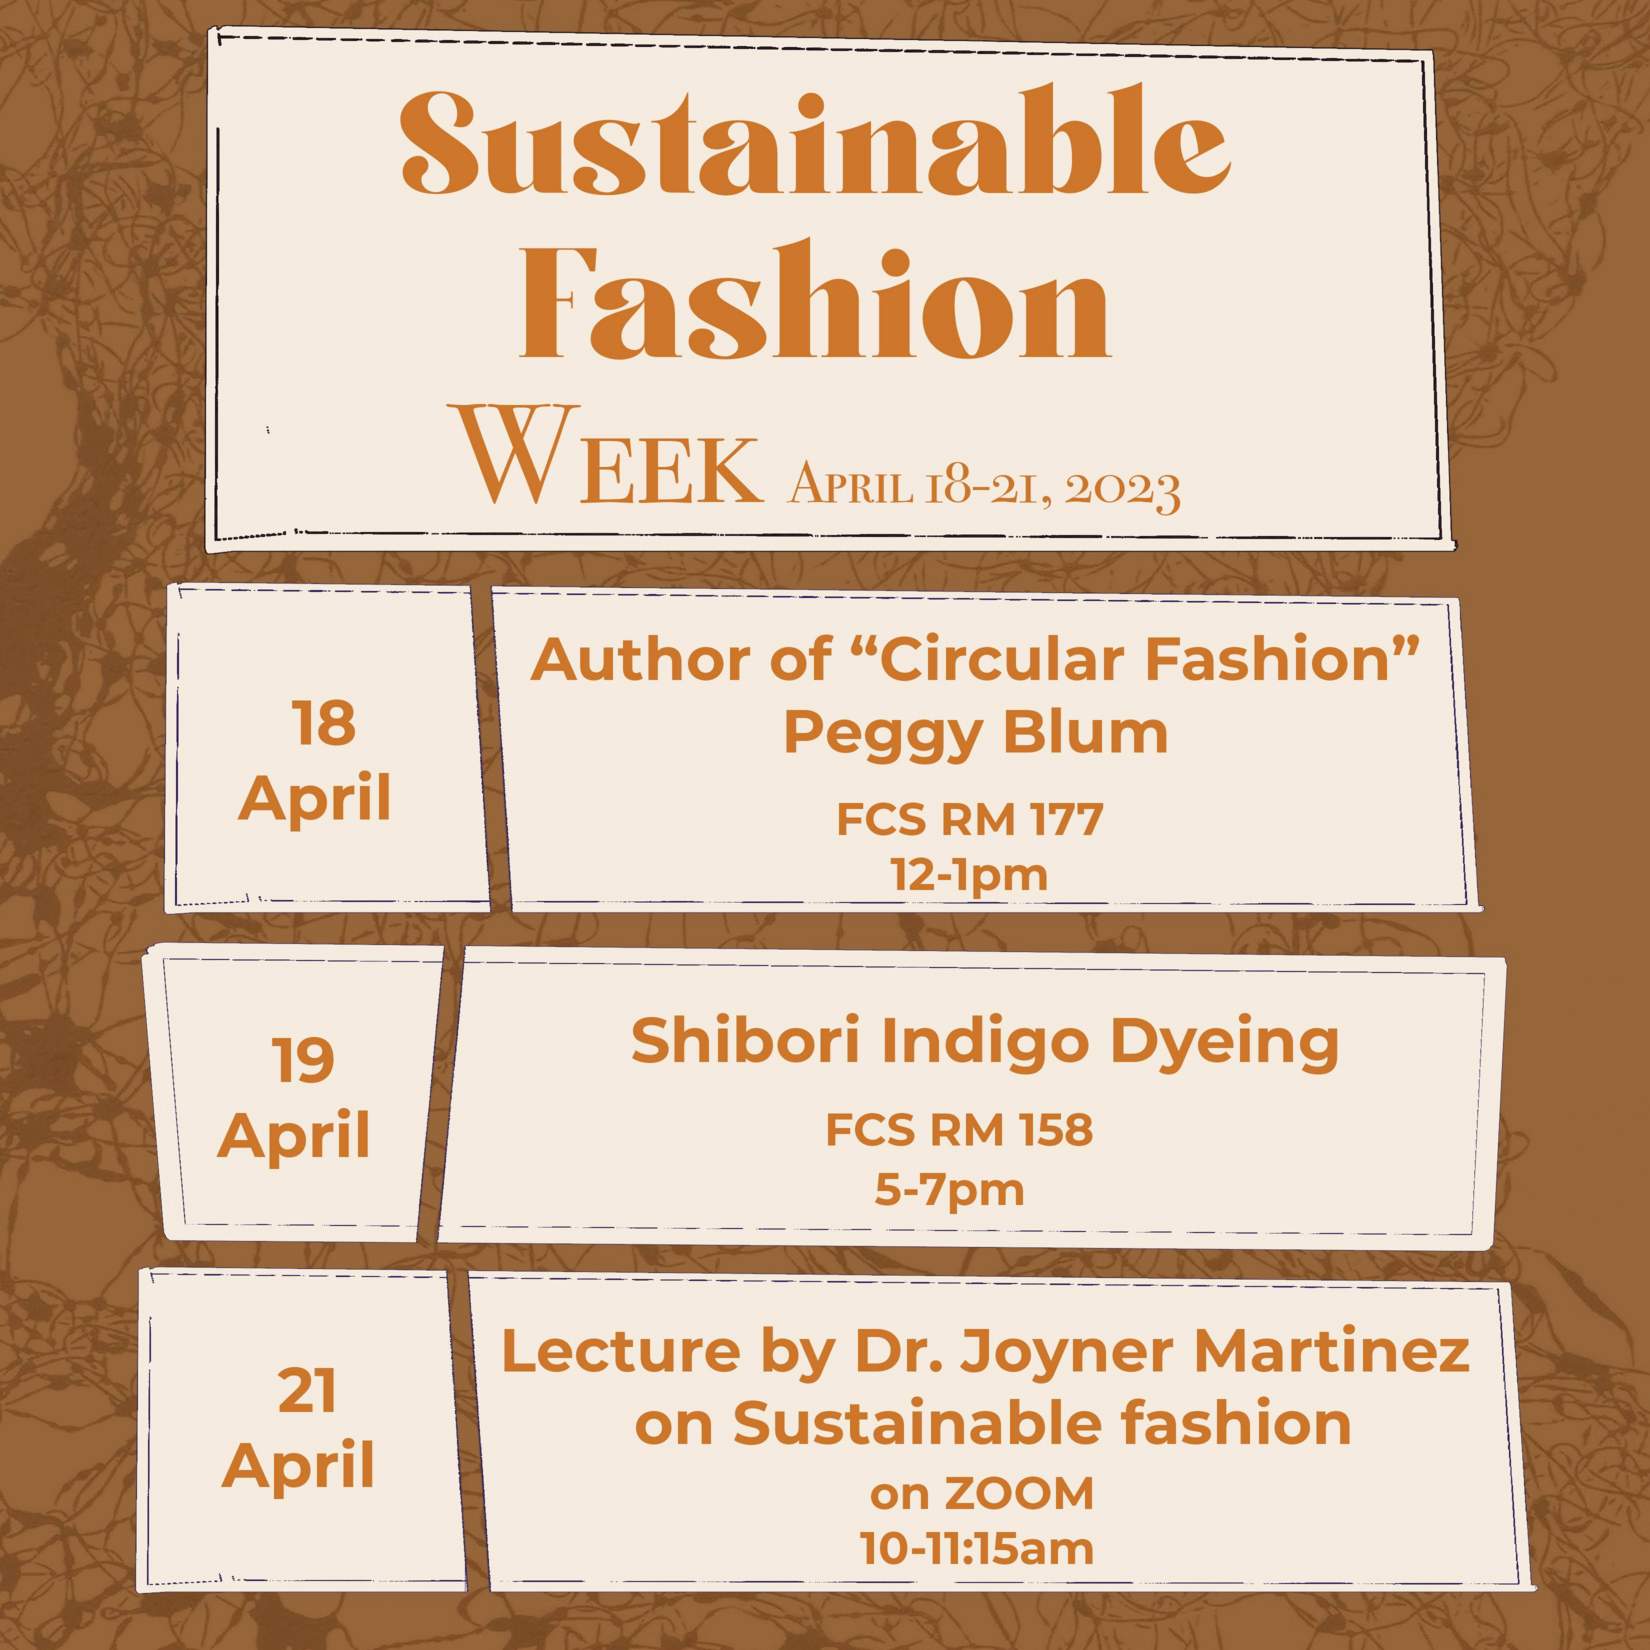 Sustainable fashion week from April 18-21